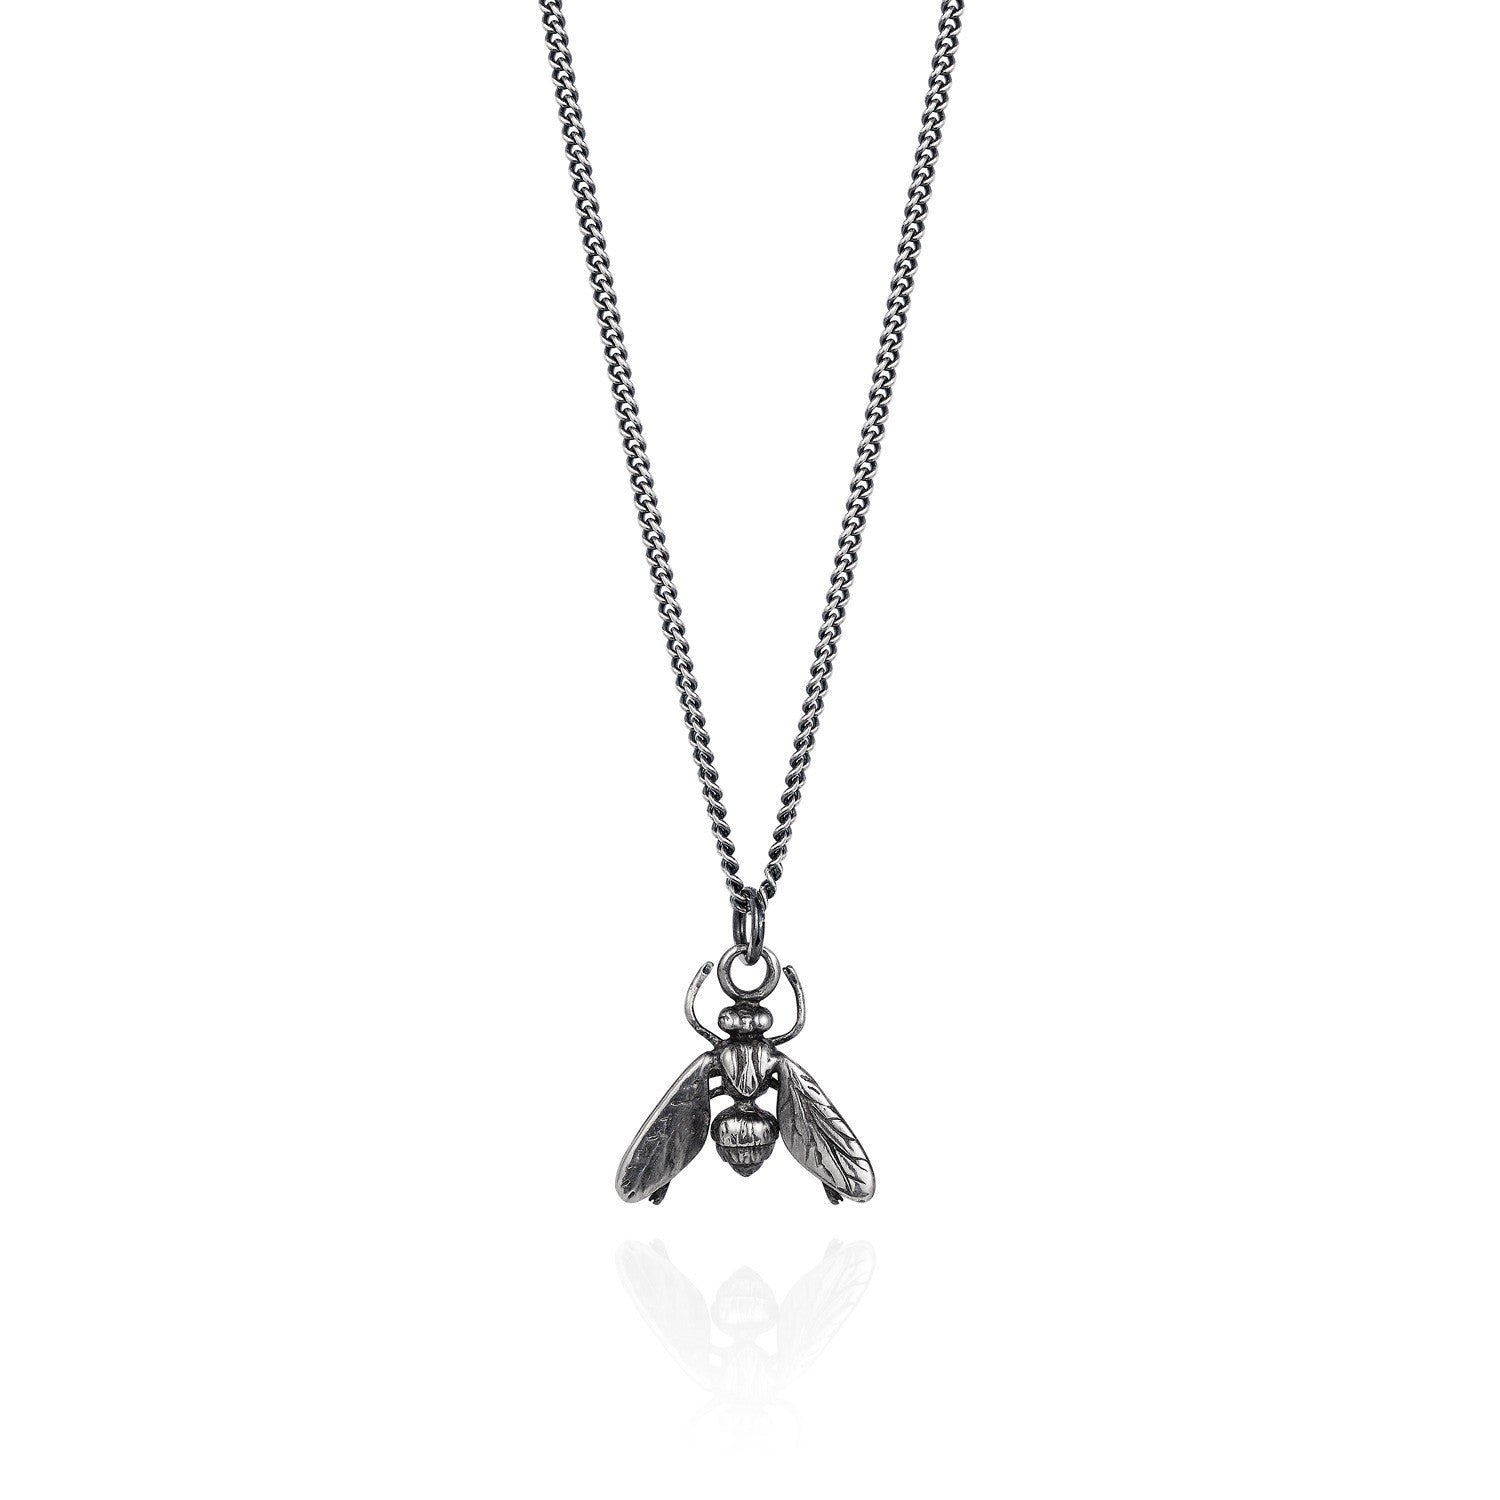 Dark Silver Hoverfly Necklace